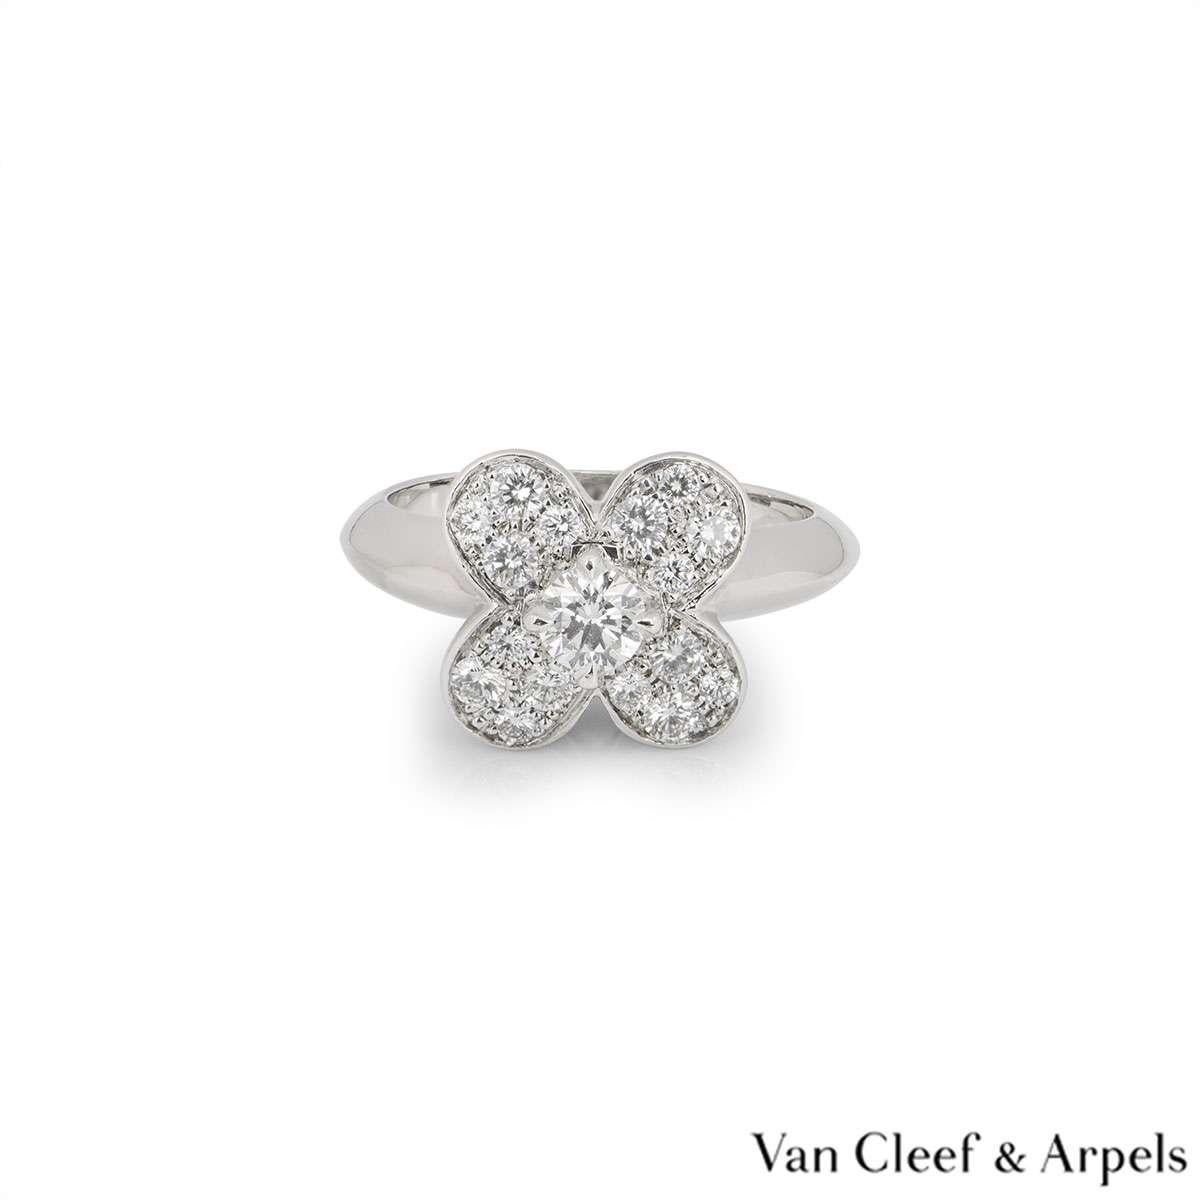 A stunning 18k white gold Alhambra ring by Van Cleef & Arples. The central flower motif is set with a single claw set round brilliant cut diamond weighing approximately 0.35ct. The petals of the flower are pave set with round brilliant cut diamonds